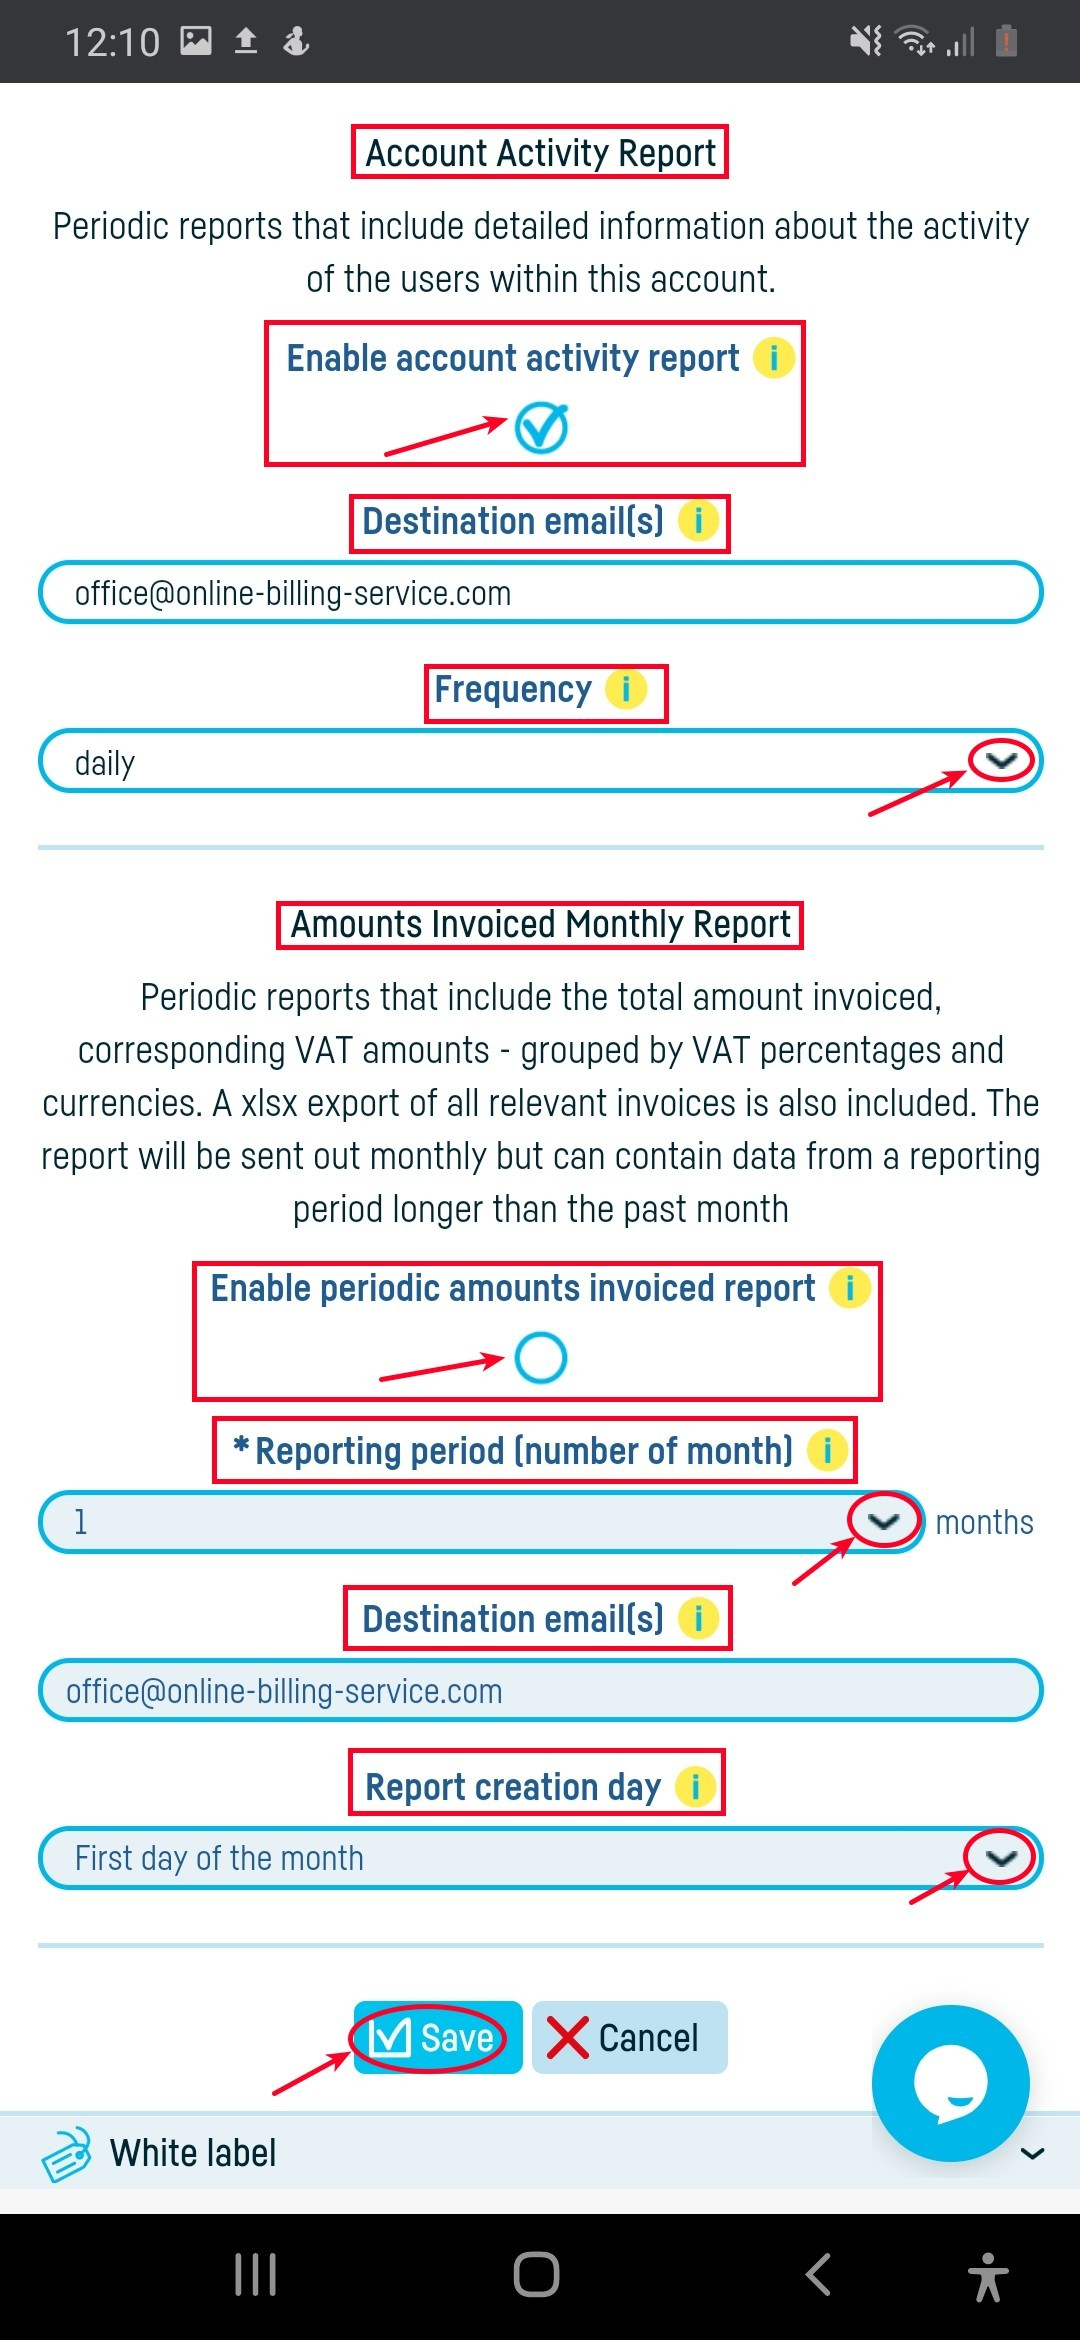 Account activity reports and total invoiced report - step 3